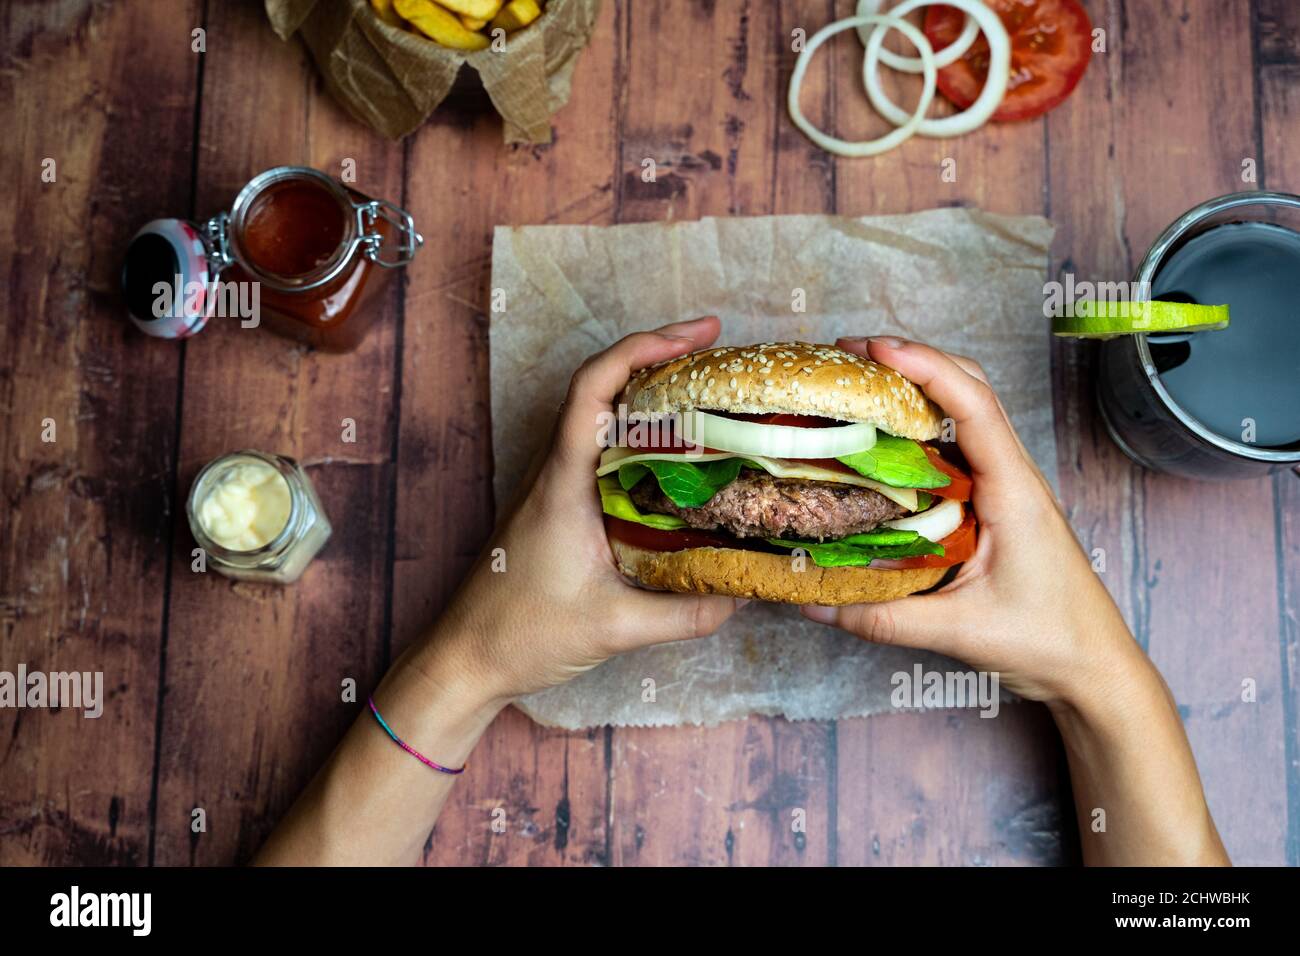 Person holding a burger with fries, onion rings and tomato on wooden table Stock Photo